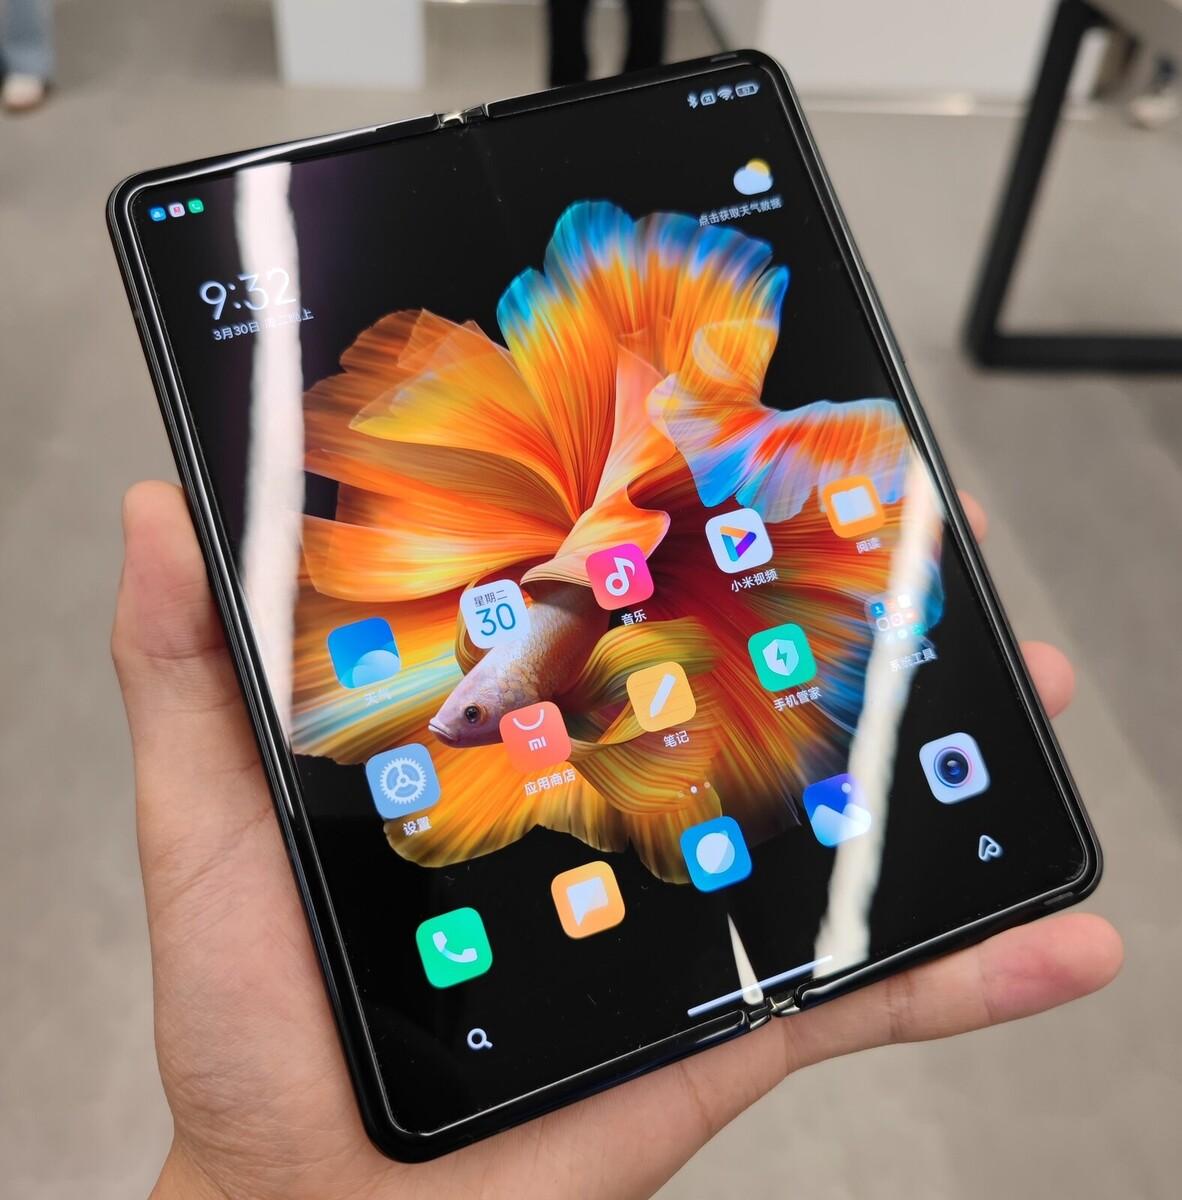 Mi Mix Fold hands-on pictures and videos show that the crease is strong with Xiaomi's first foldable smartphone